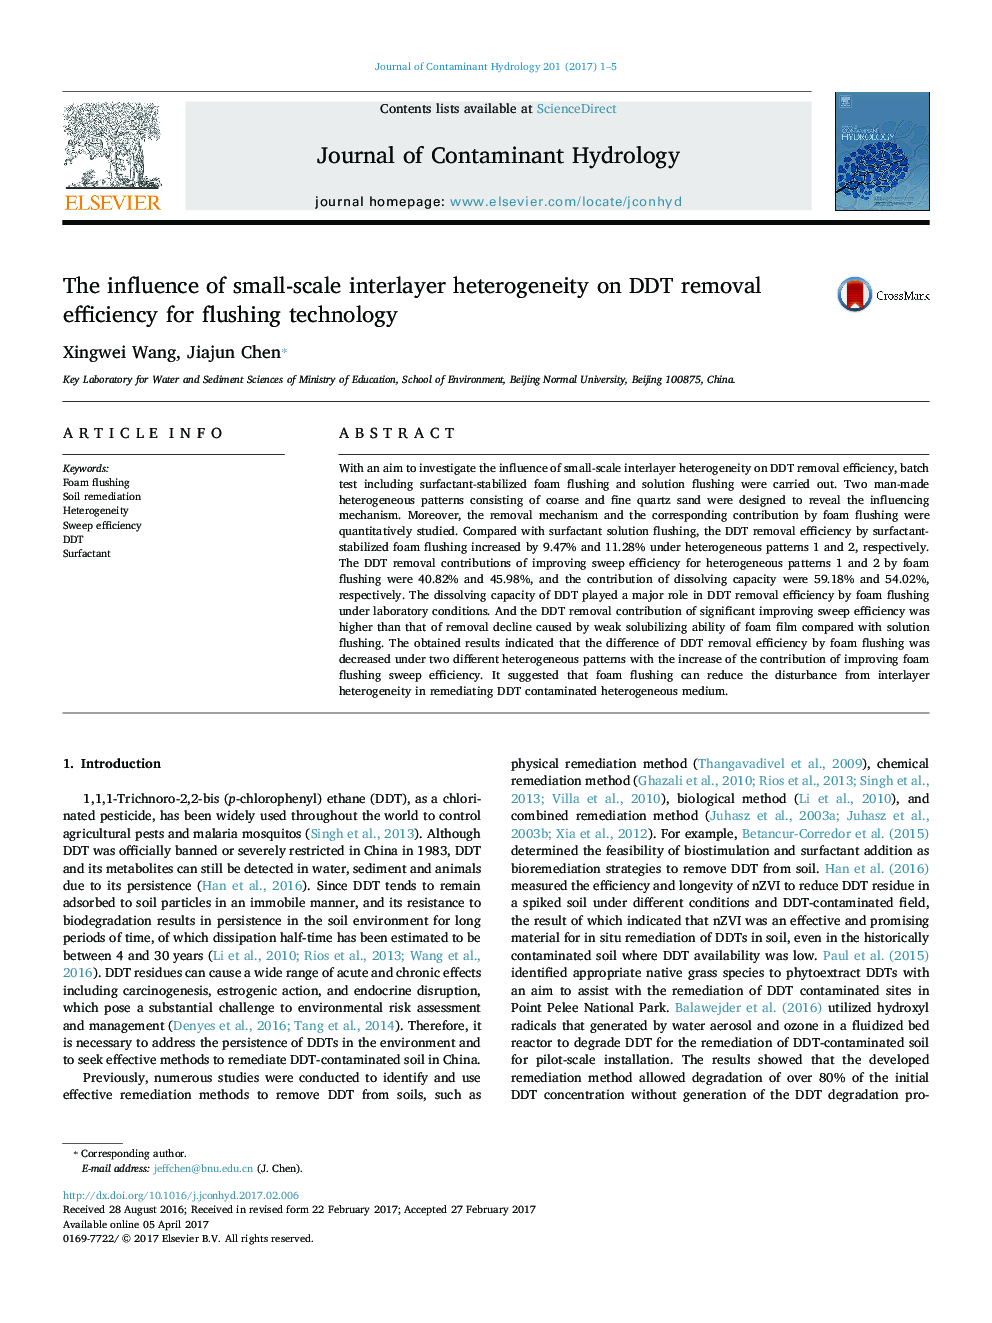 The influence of small-scale interlayer heterogeneity on DDT removal efficiency for flushing technology